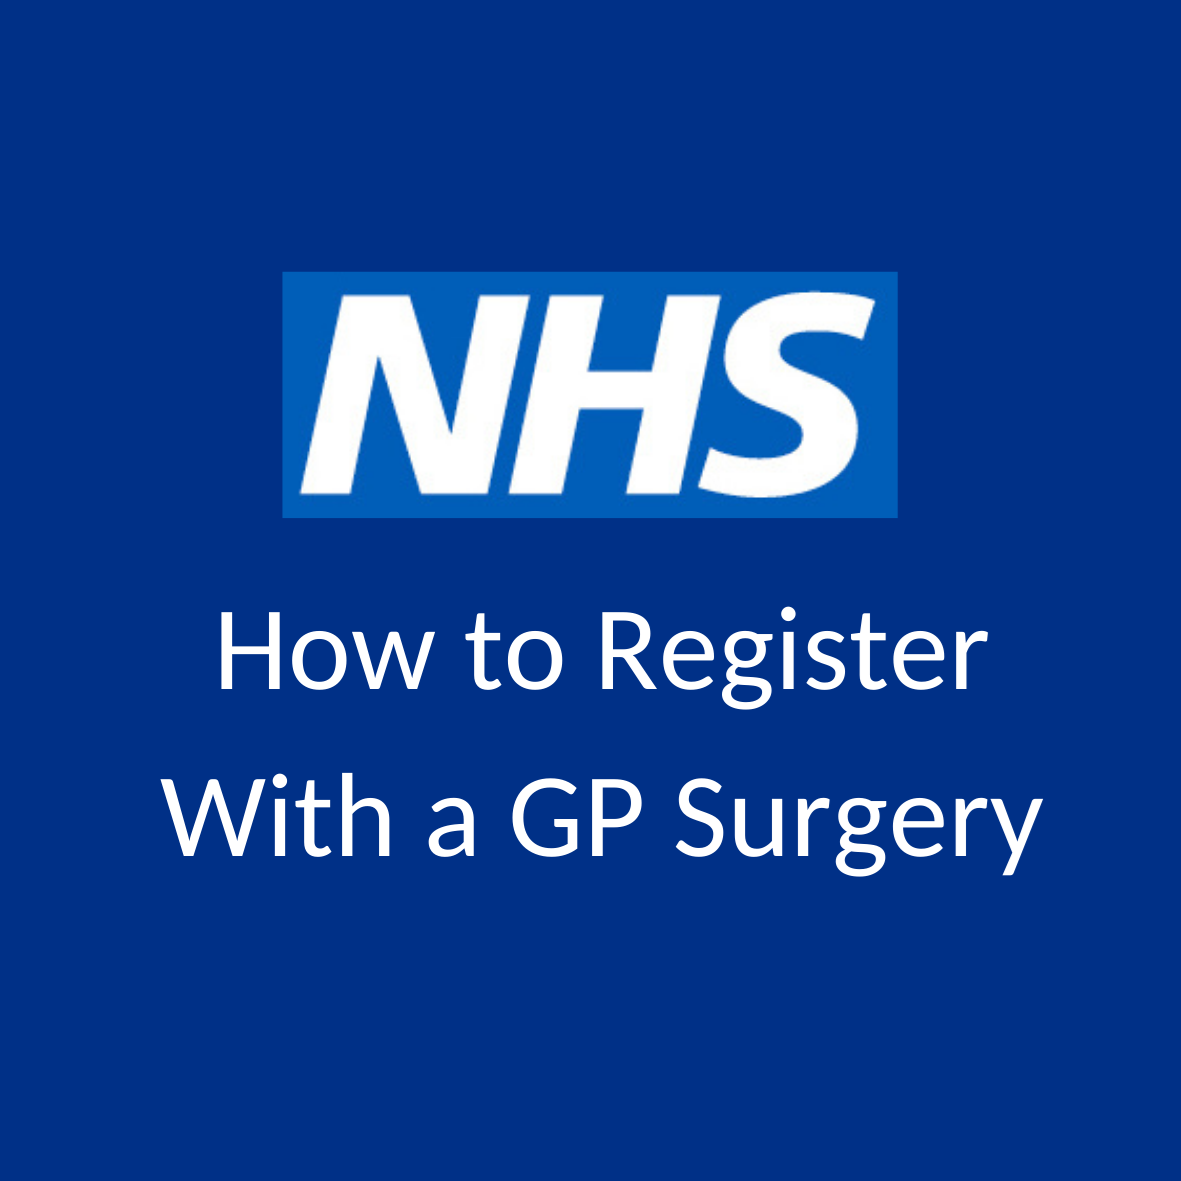 NHS Logo with Words 'How to Register With a GP Surgery'